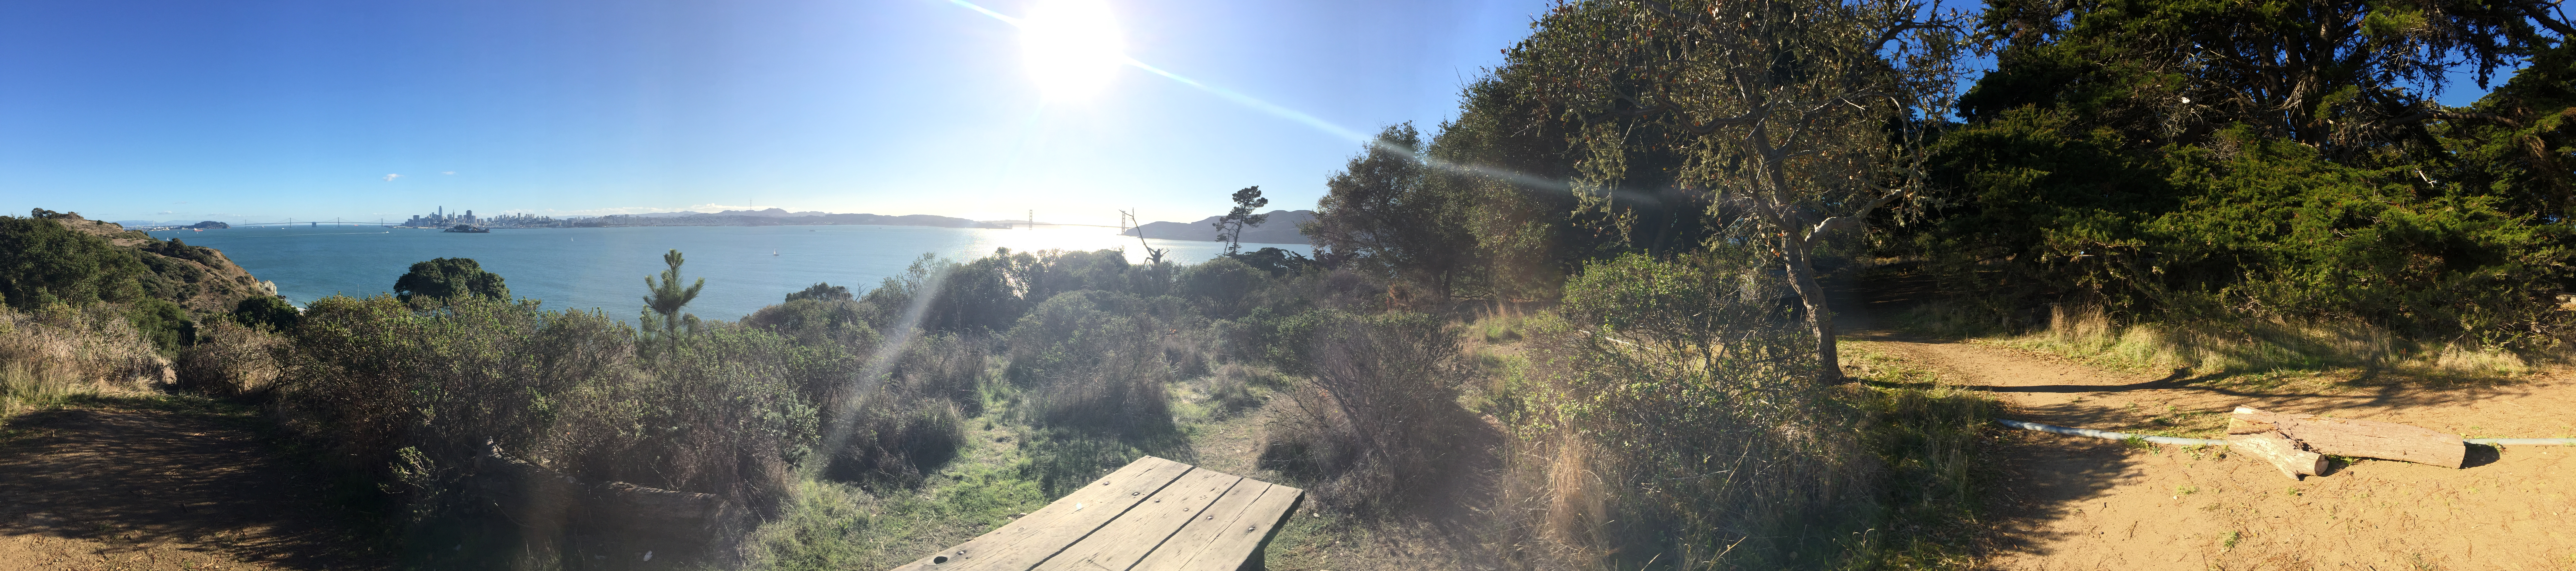 panoramic view of SF skyline from campsite #5